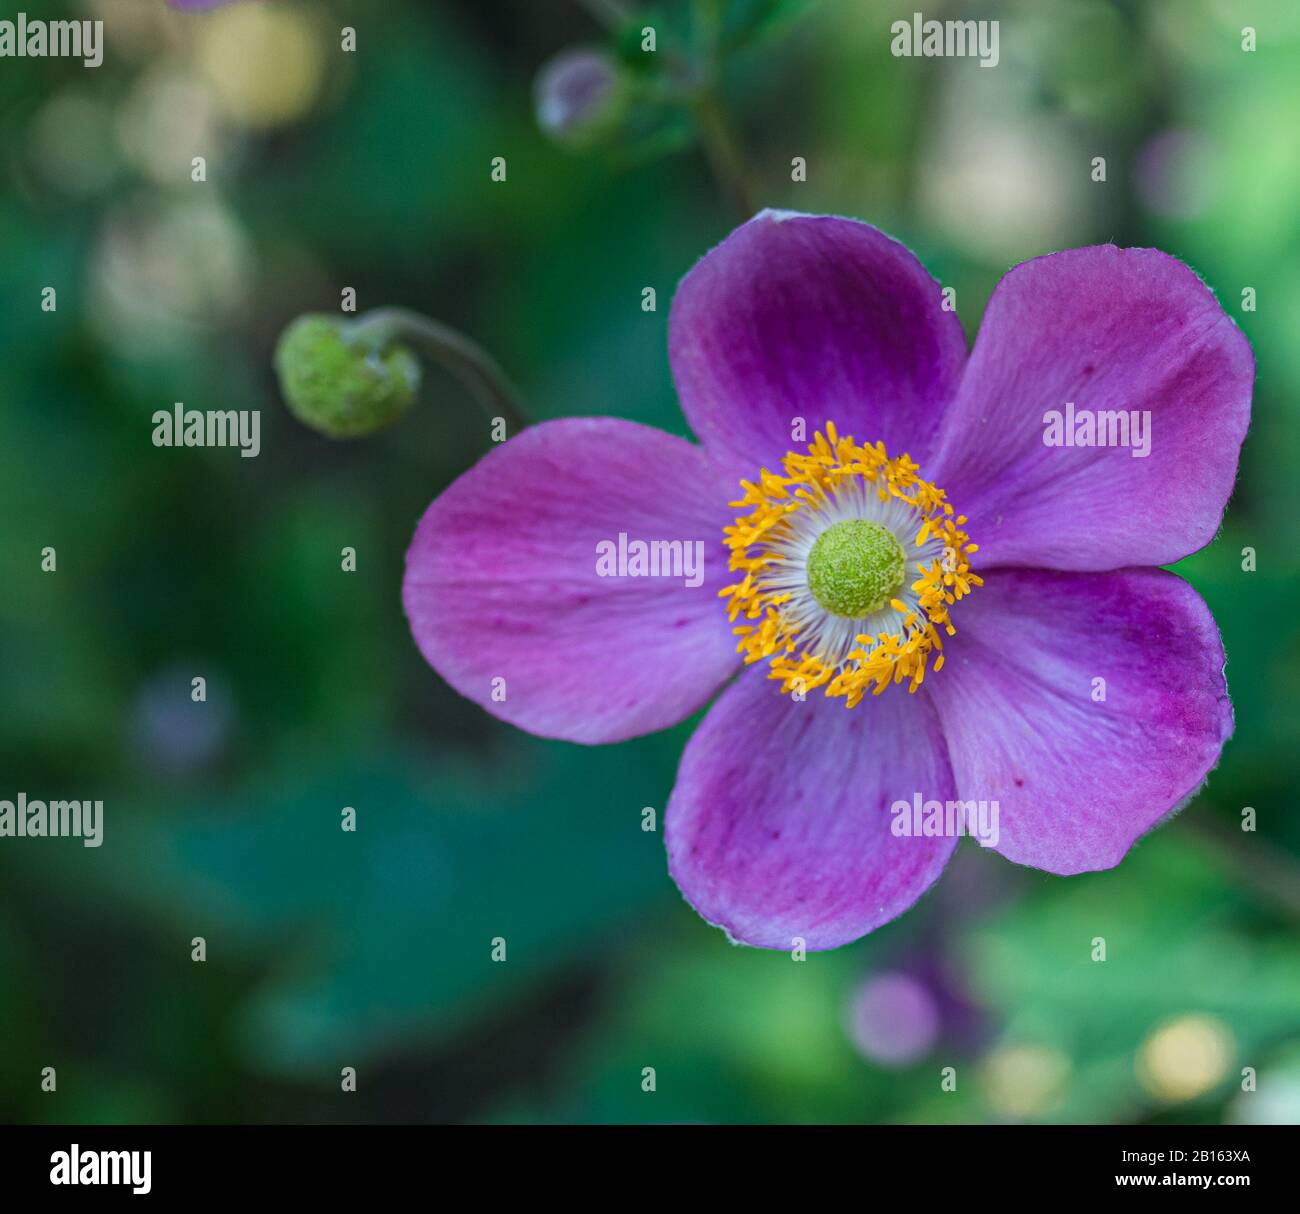 anemone flower purple Anemone hupehensis) plants in flower. Pink garden plant in the family Ranunculaceae. Closeup on Japanese Anemone flowers Stock Photo